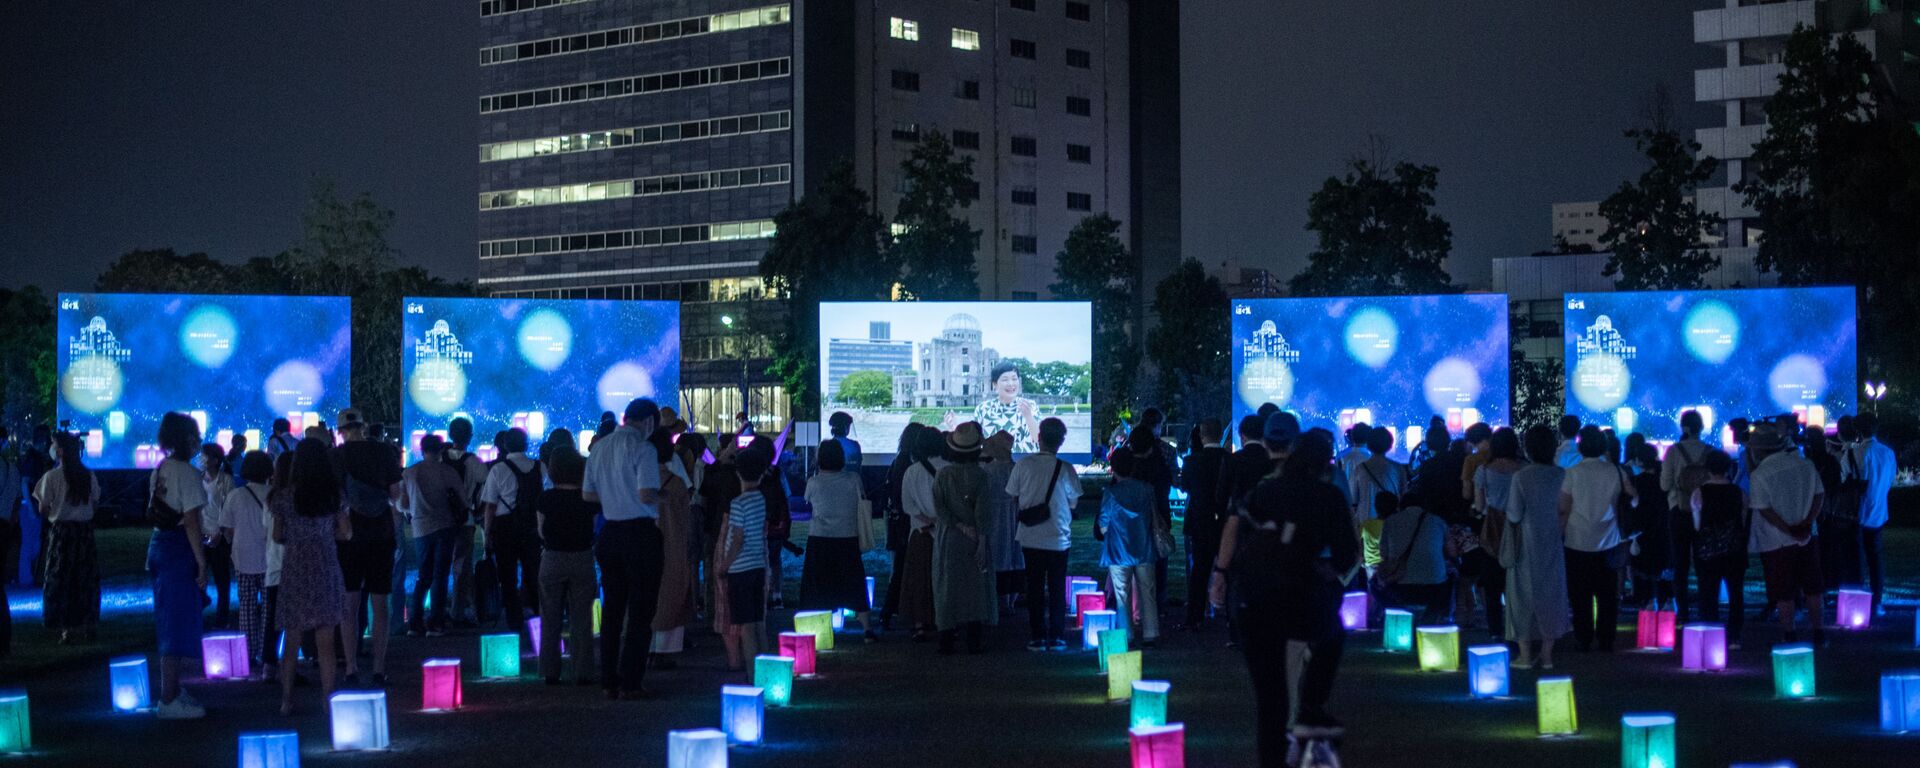 Visitors watch a screen (back C) displaying virtual lanterns as paper lanterns are placed to mark the 75th anniversary of the atomic bombing, at a park in in Hiroshima on August 6, 2020. - Japan on August 6, 2020 marked 75 years since the world's first atomic bomb attack, with the COVID-19 coronavirus pandemic forcing a scaling back of annual ceremonies to commemorate the victims. - Sputnik International, 1920, 06.08.2020